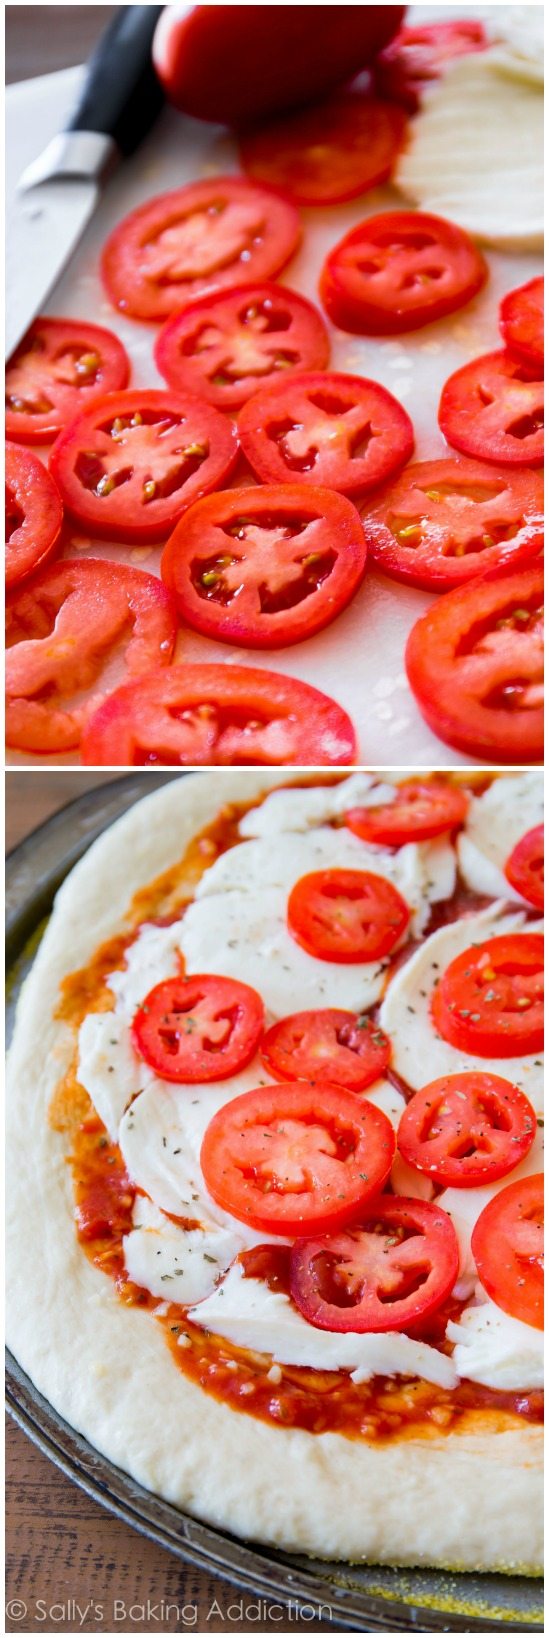 2 images of sliced tomatoes and tomatoes on top of pizza crust with sauce and cheese